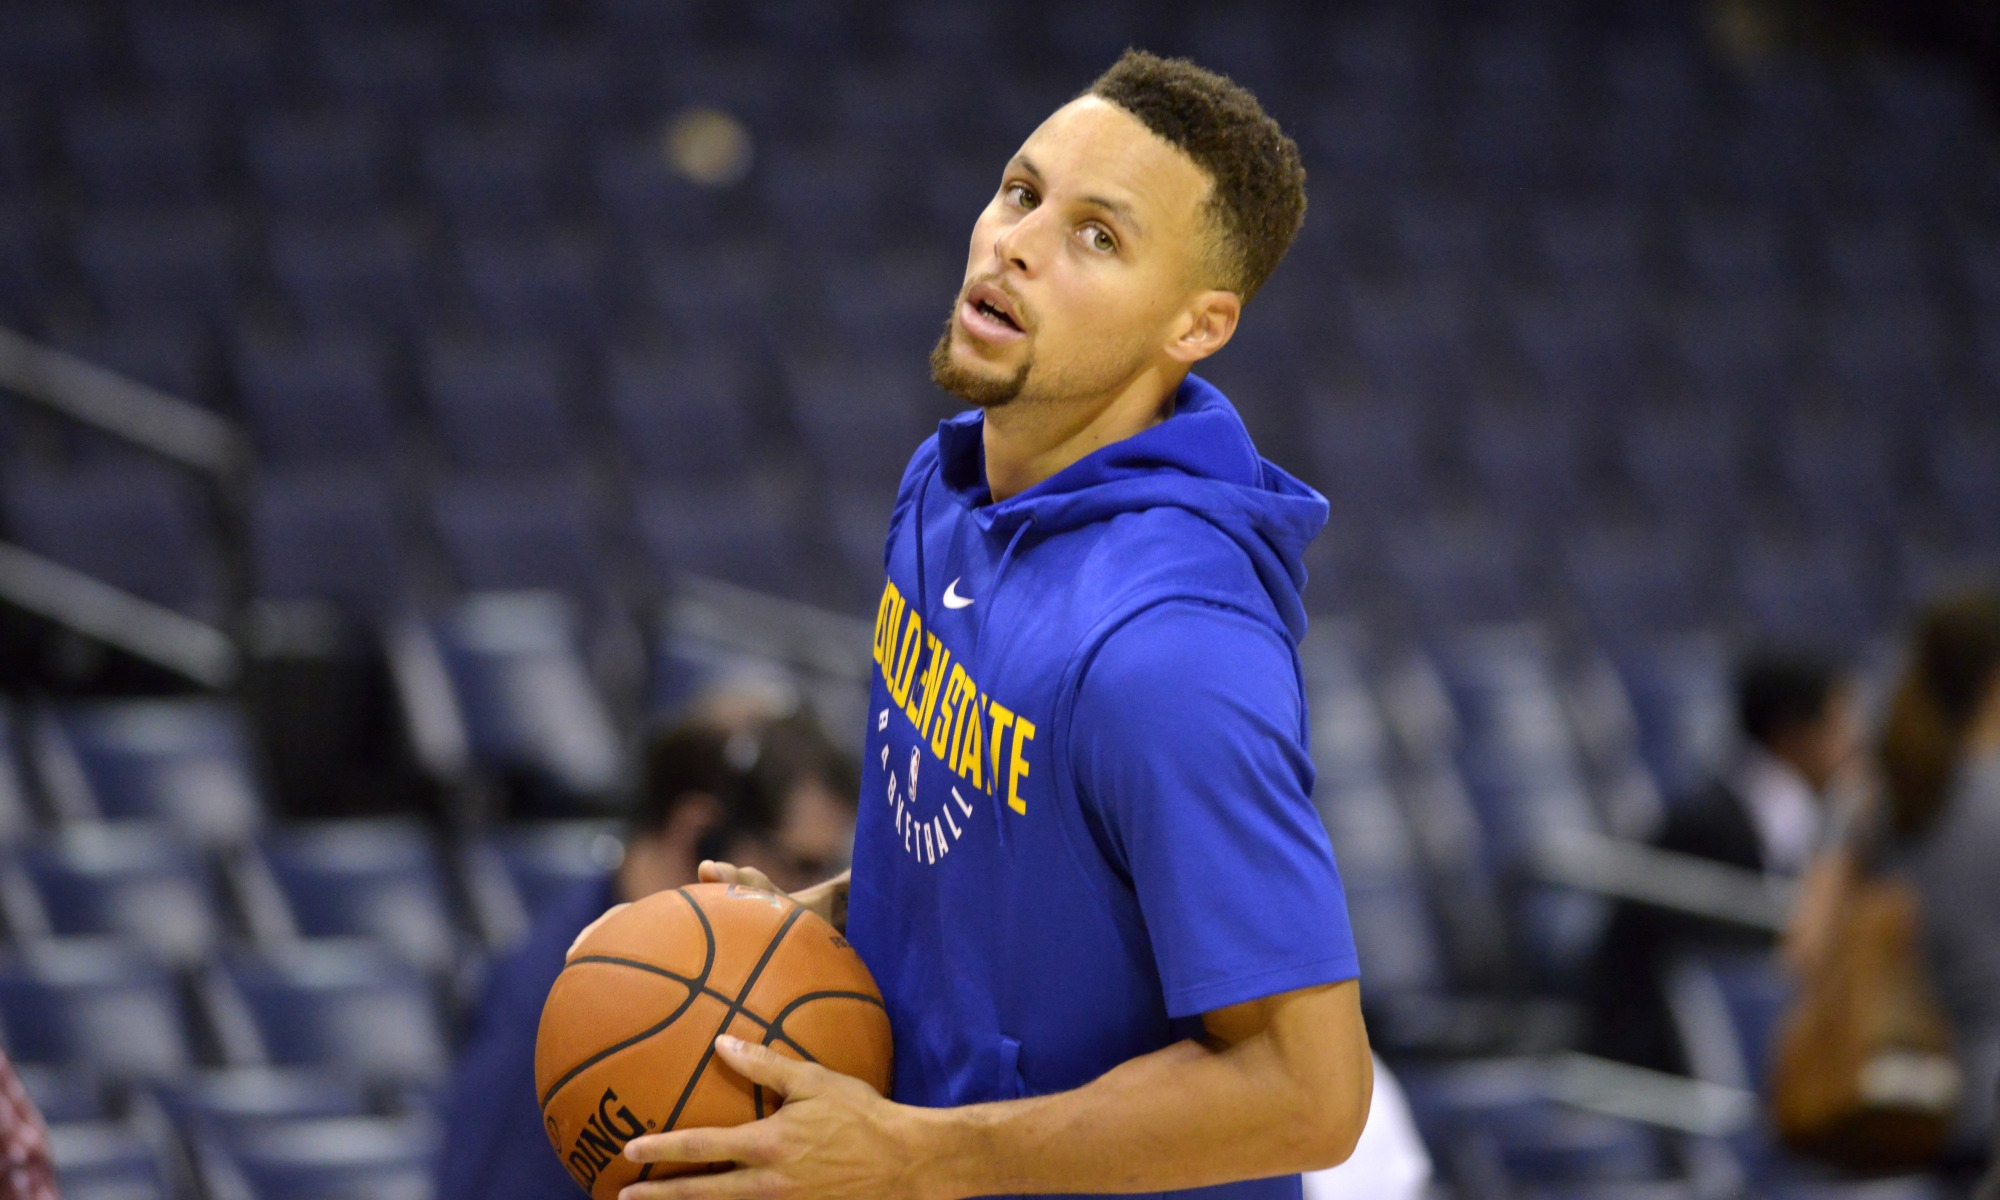 Steve Kerr: Steph Curry will not play ‘anytime soon’